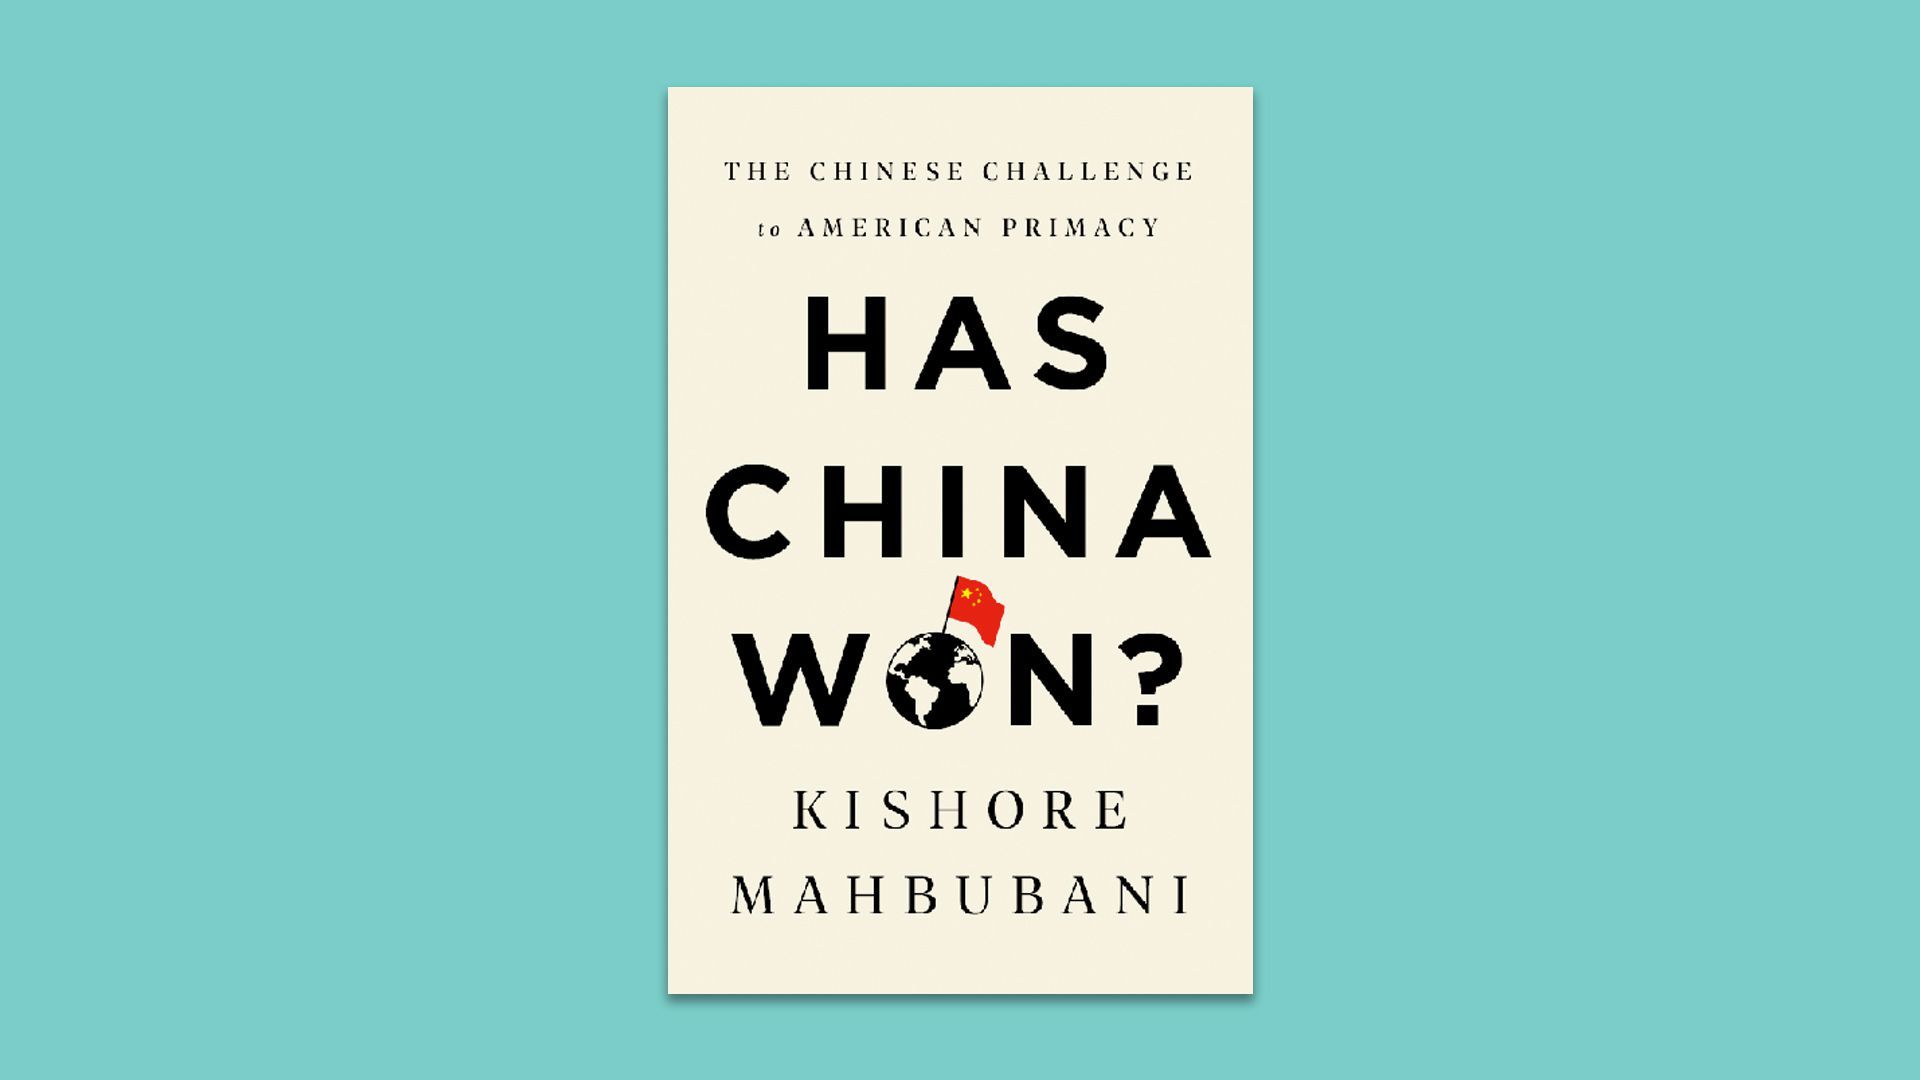 Book cover of "Has China won?"